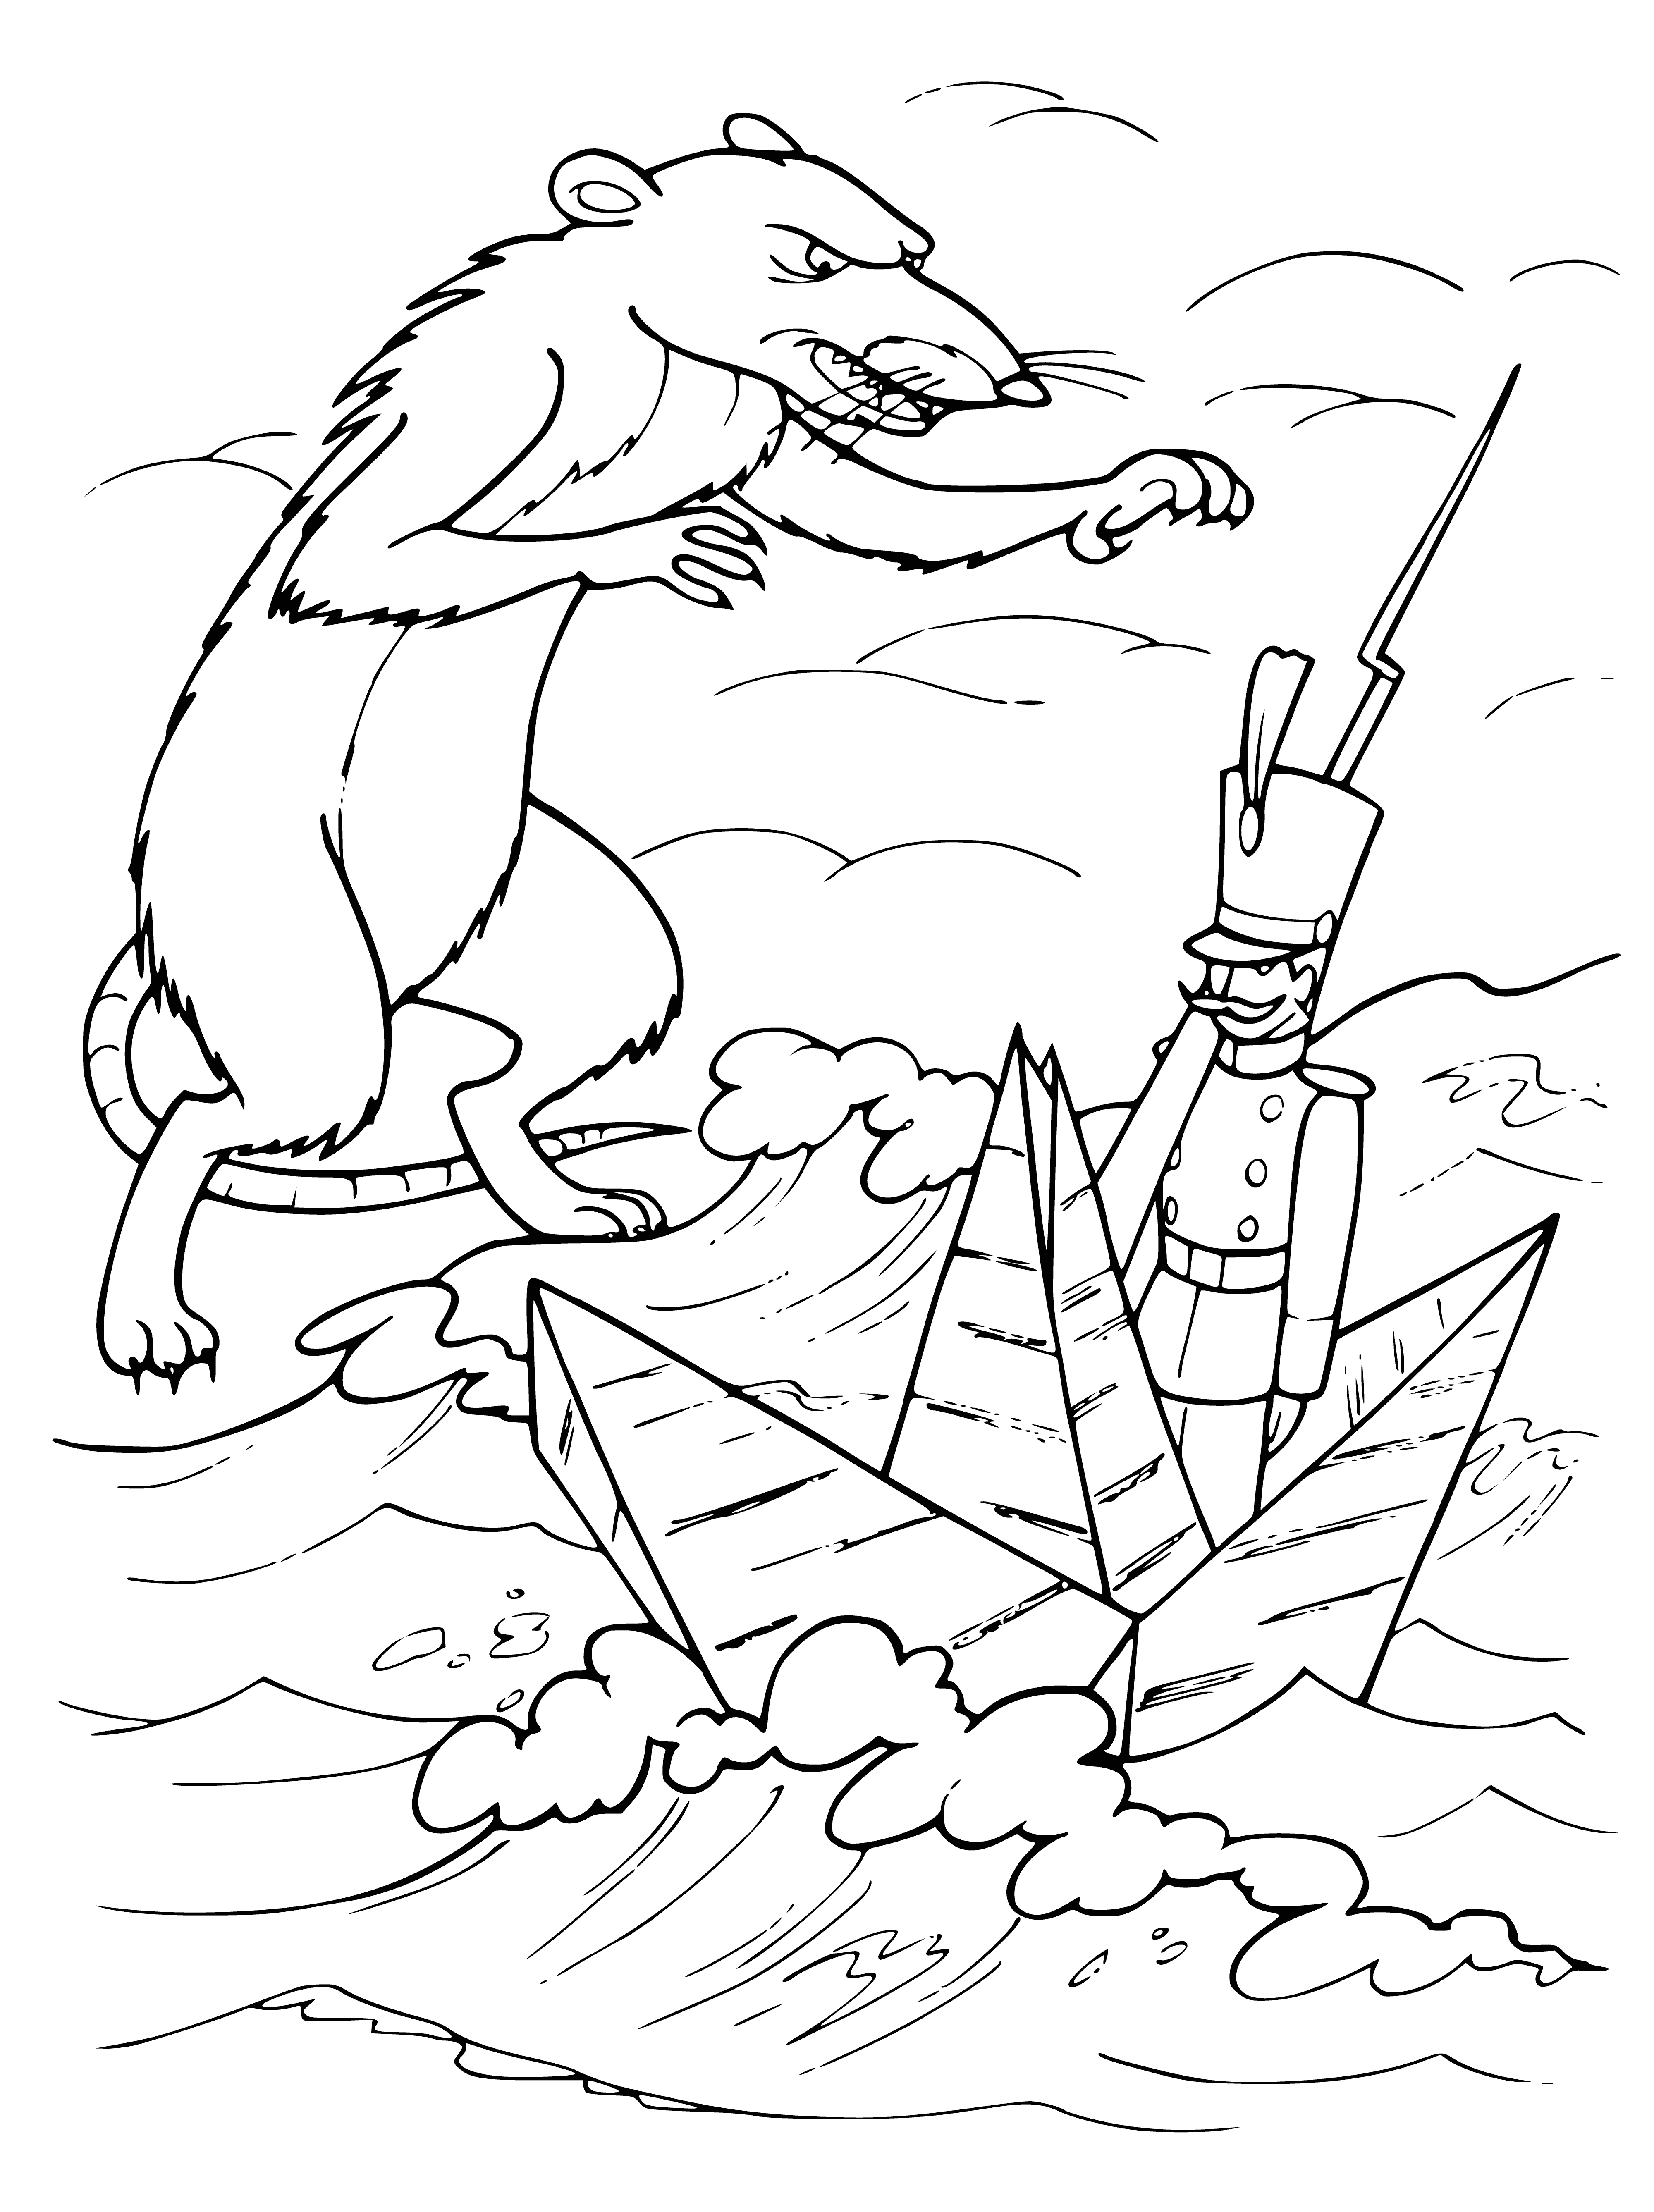 coloring page: Soldier standing on boat holding flag, surrounded by water.